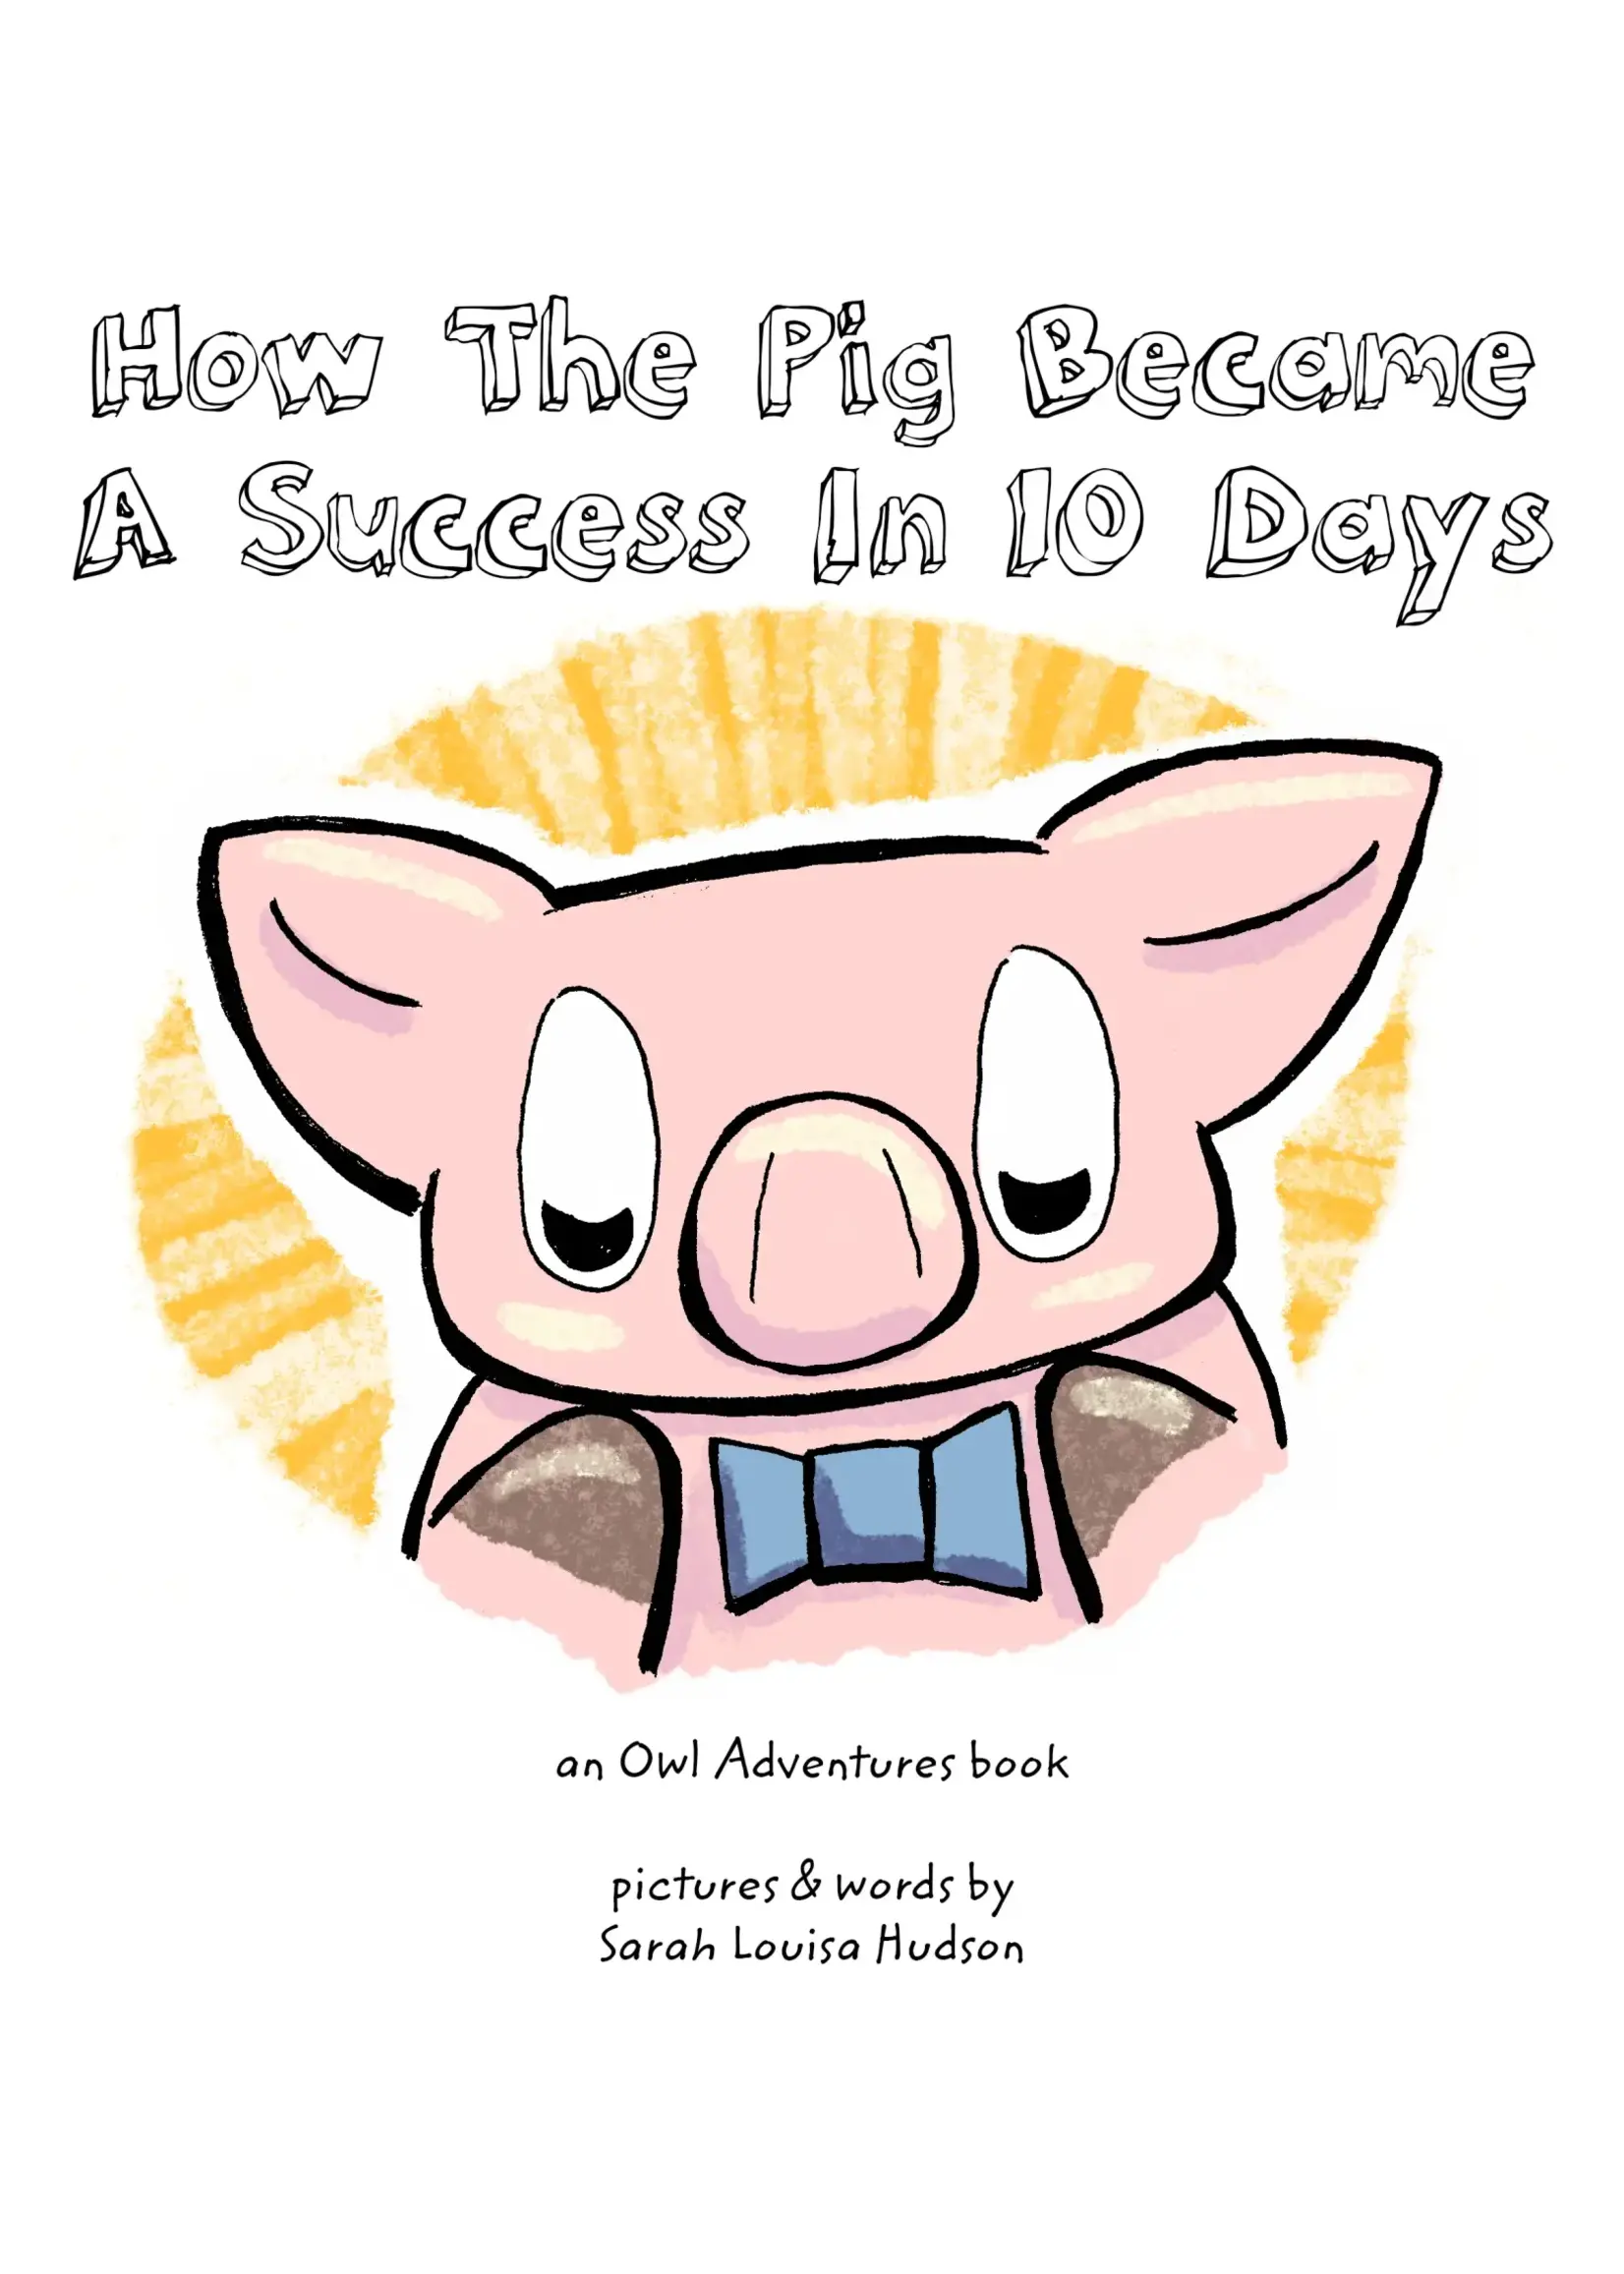 OWL ADVENTURES HOW THE PIG BECAME A SUCCESS IN 10 DAYS